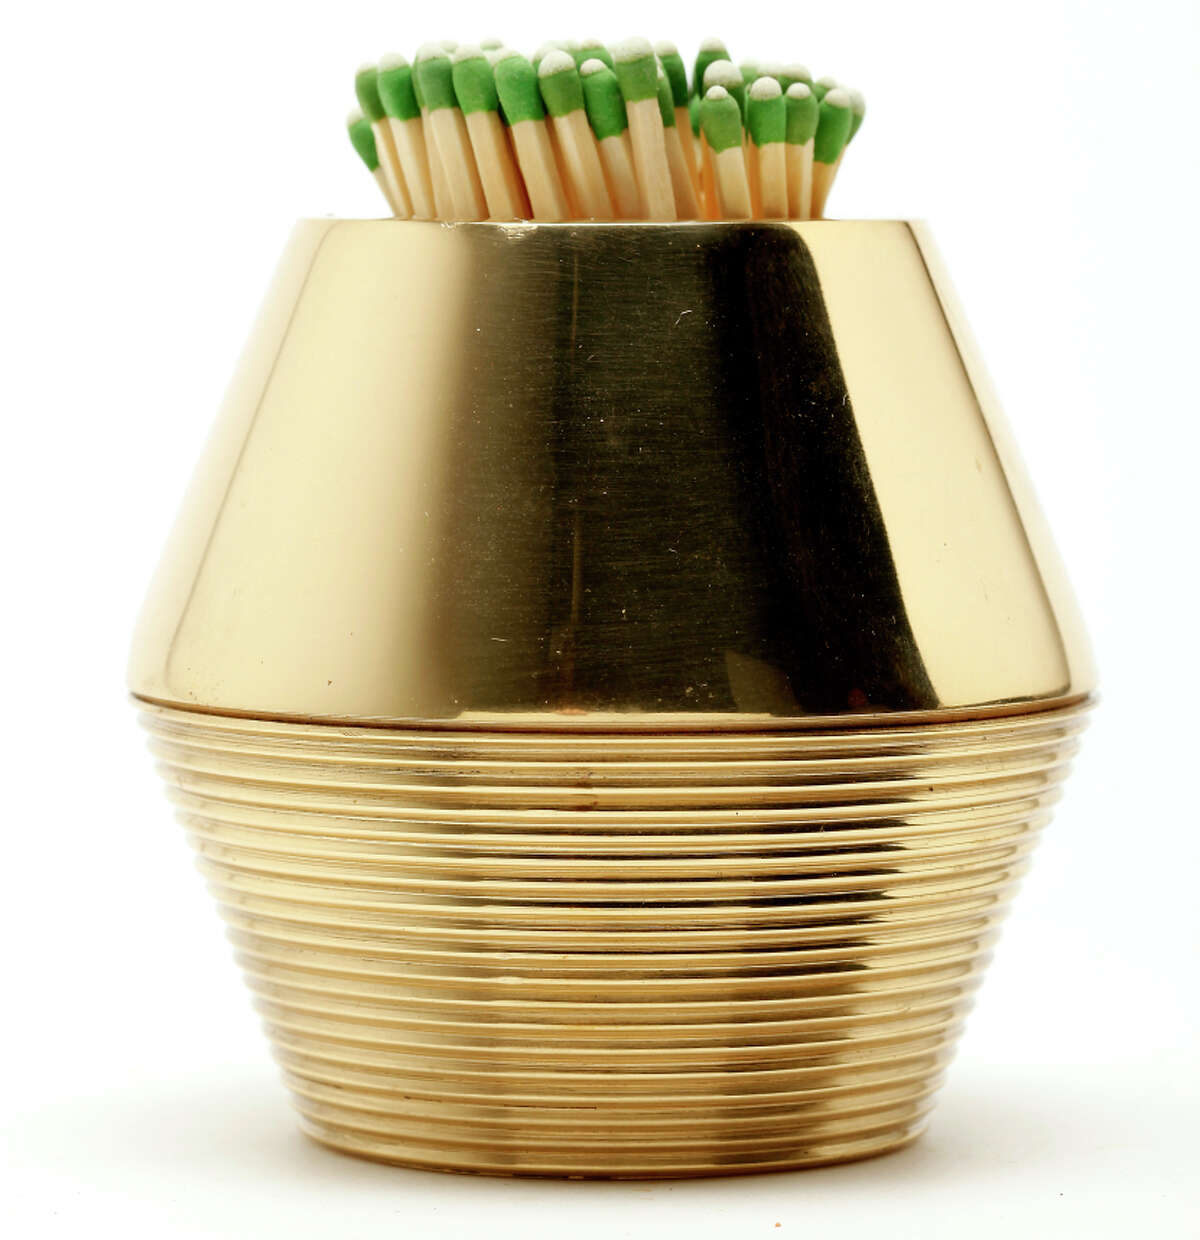 AERIN tapered cone match strike in brass works with strike-anywhere matches. $190, www.aerin.com